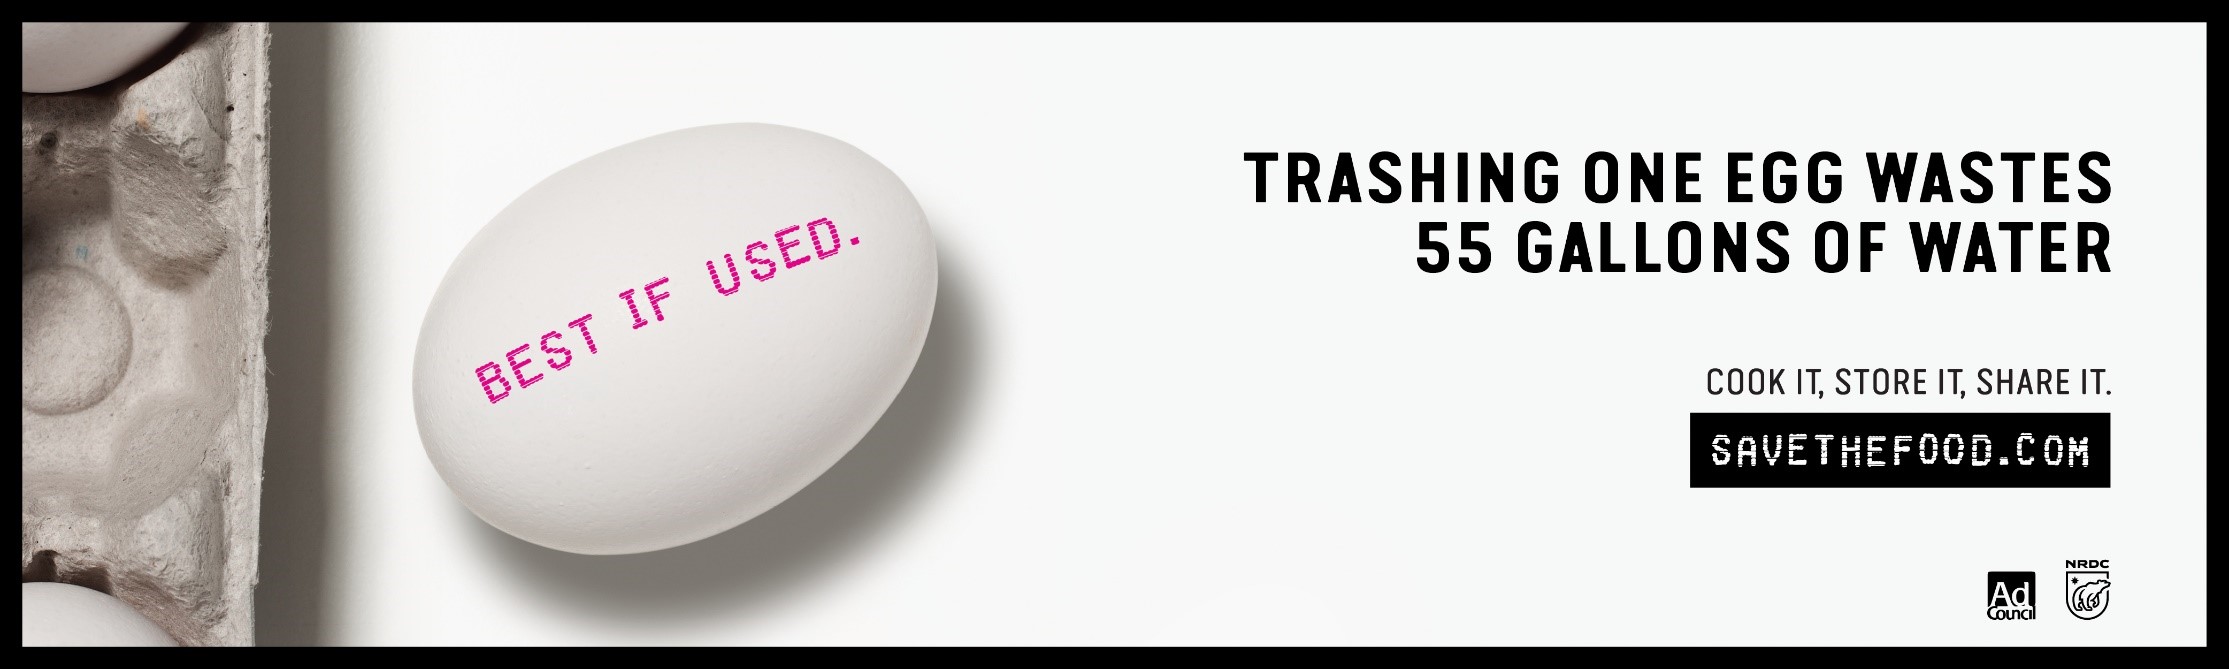 Trashing one egg wastes 55 gallons of water.